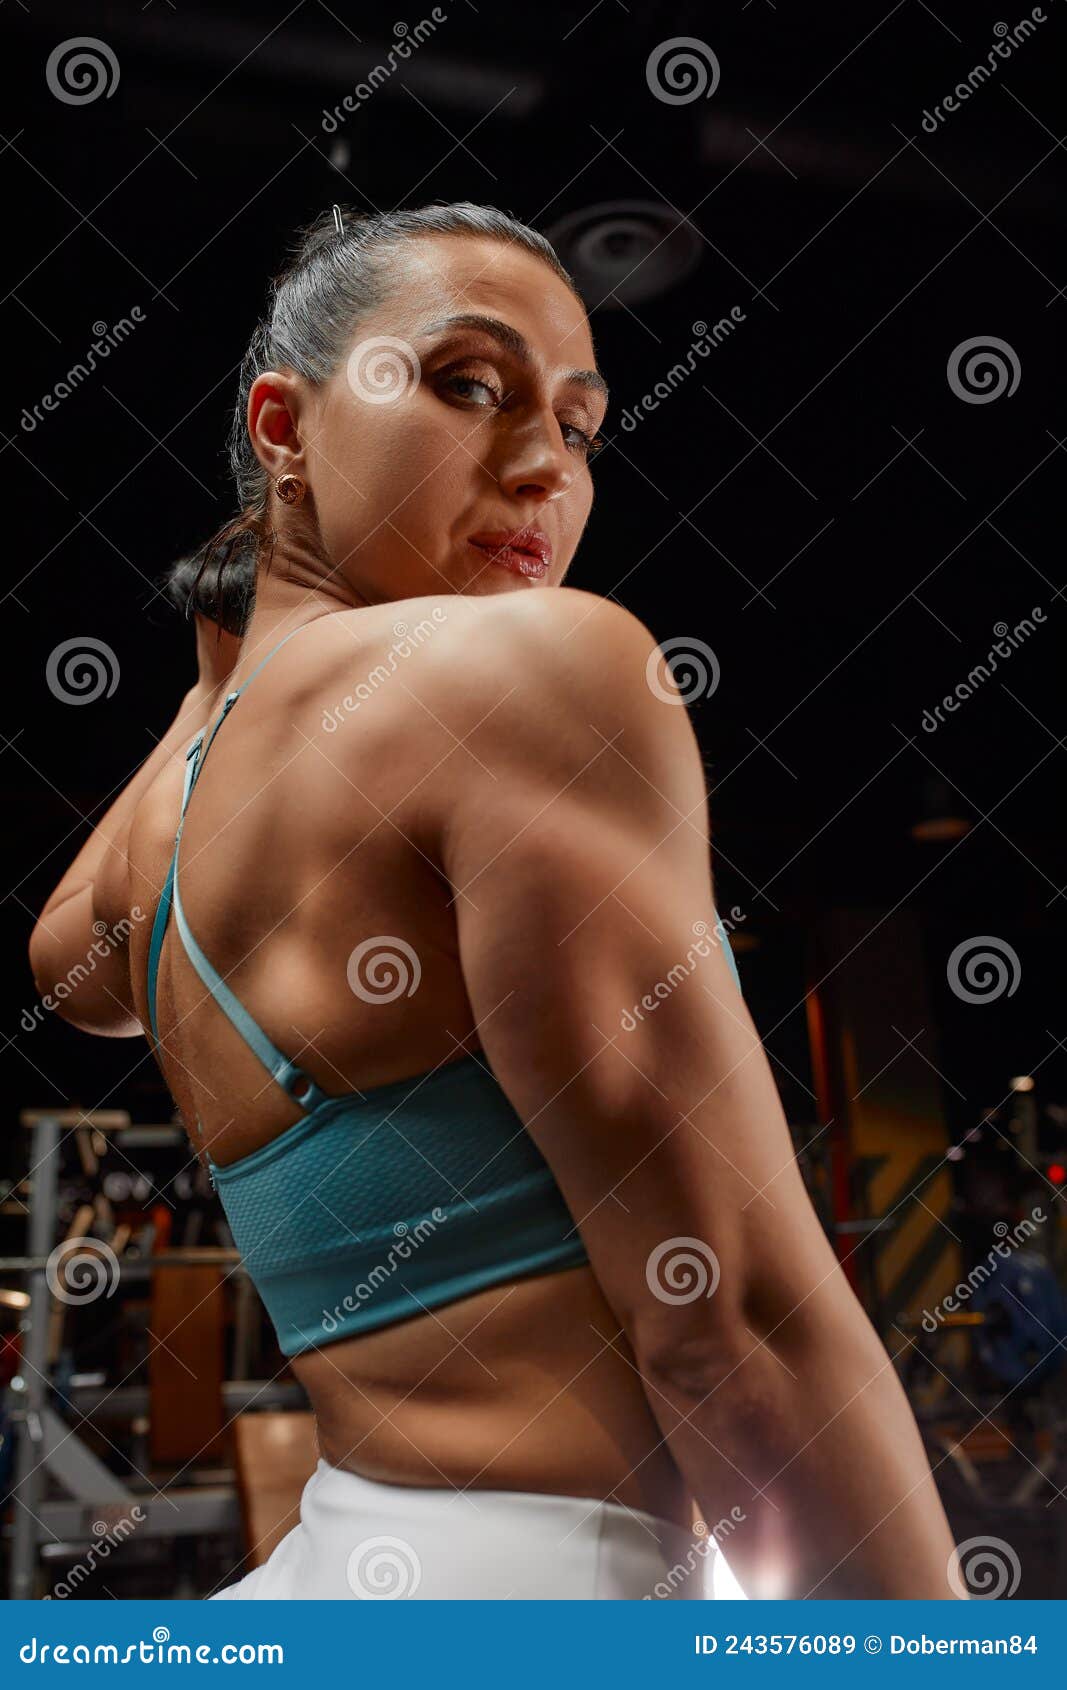 Muscular Woman in Gym Showing Back Muscles. Strong Fitness Girl